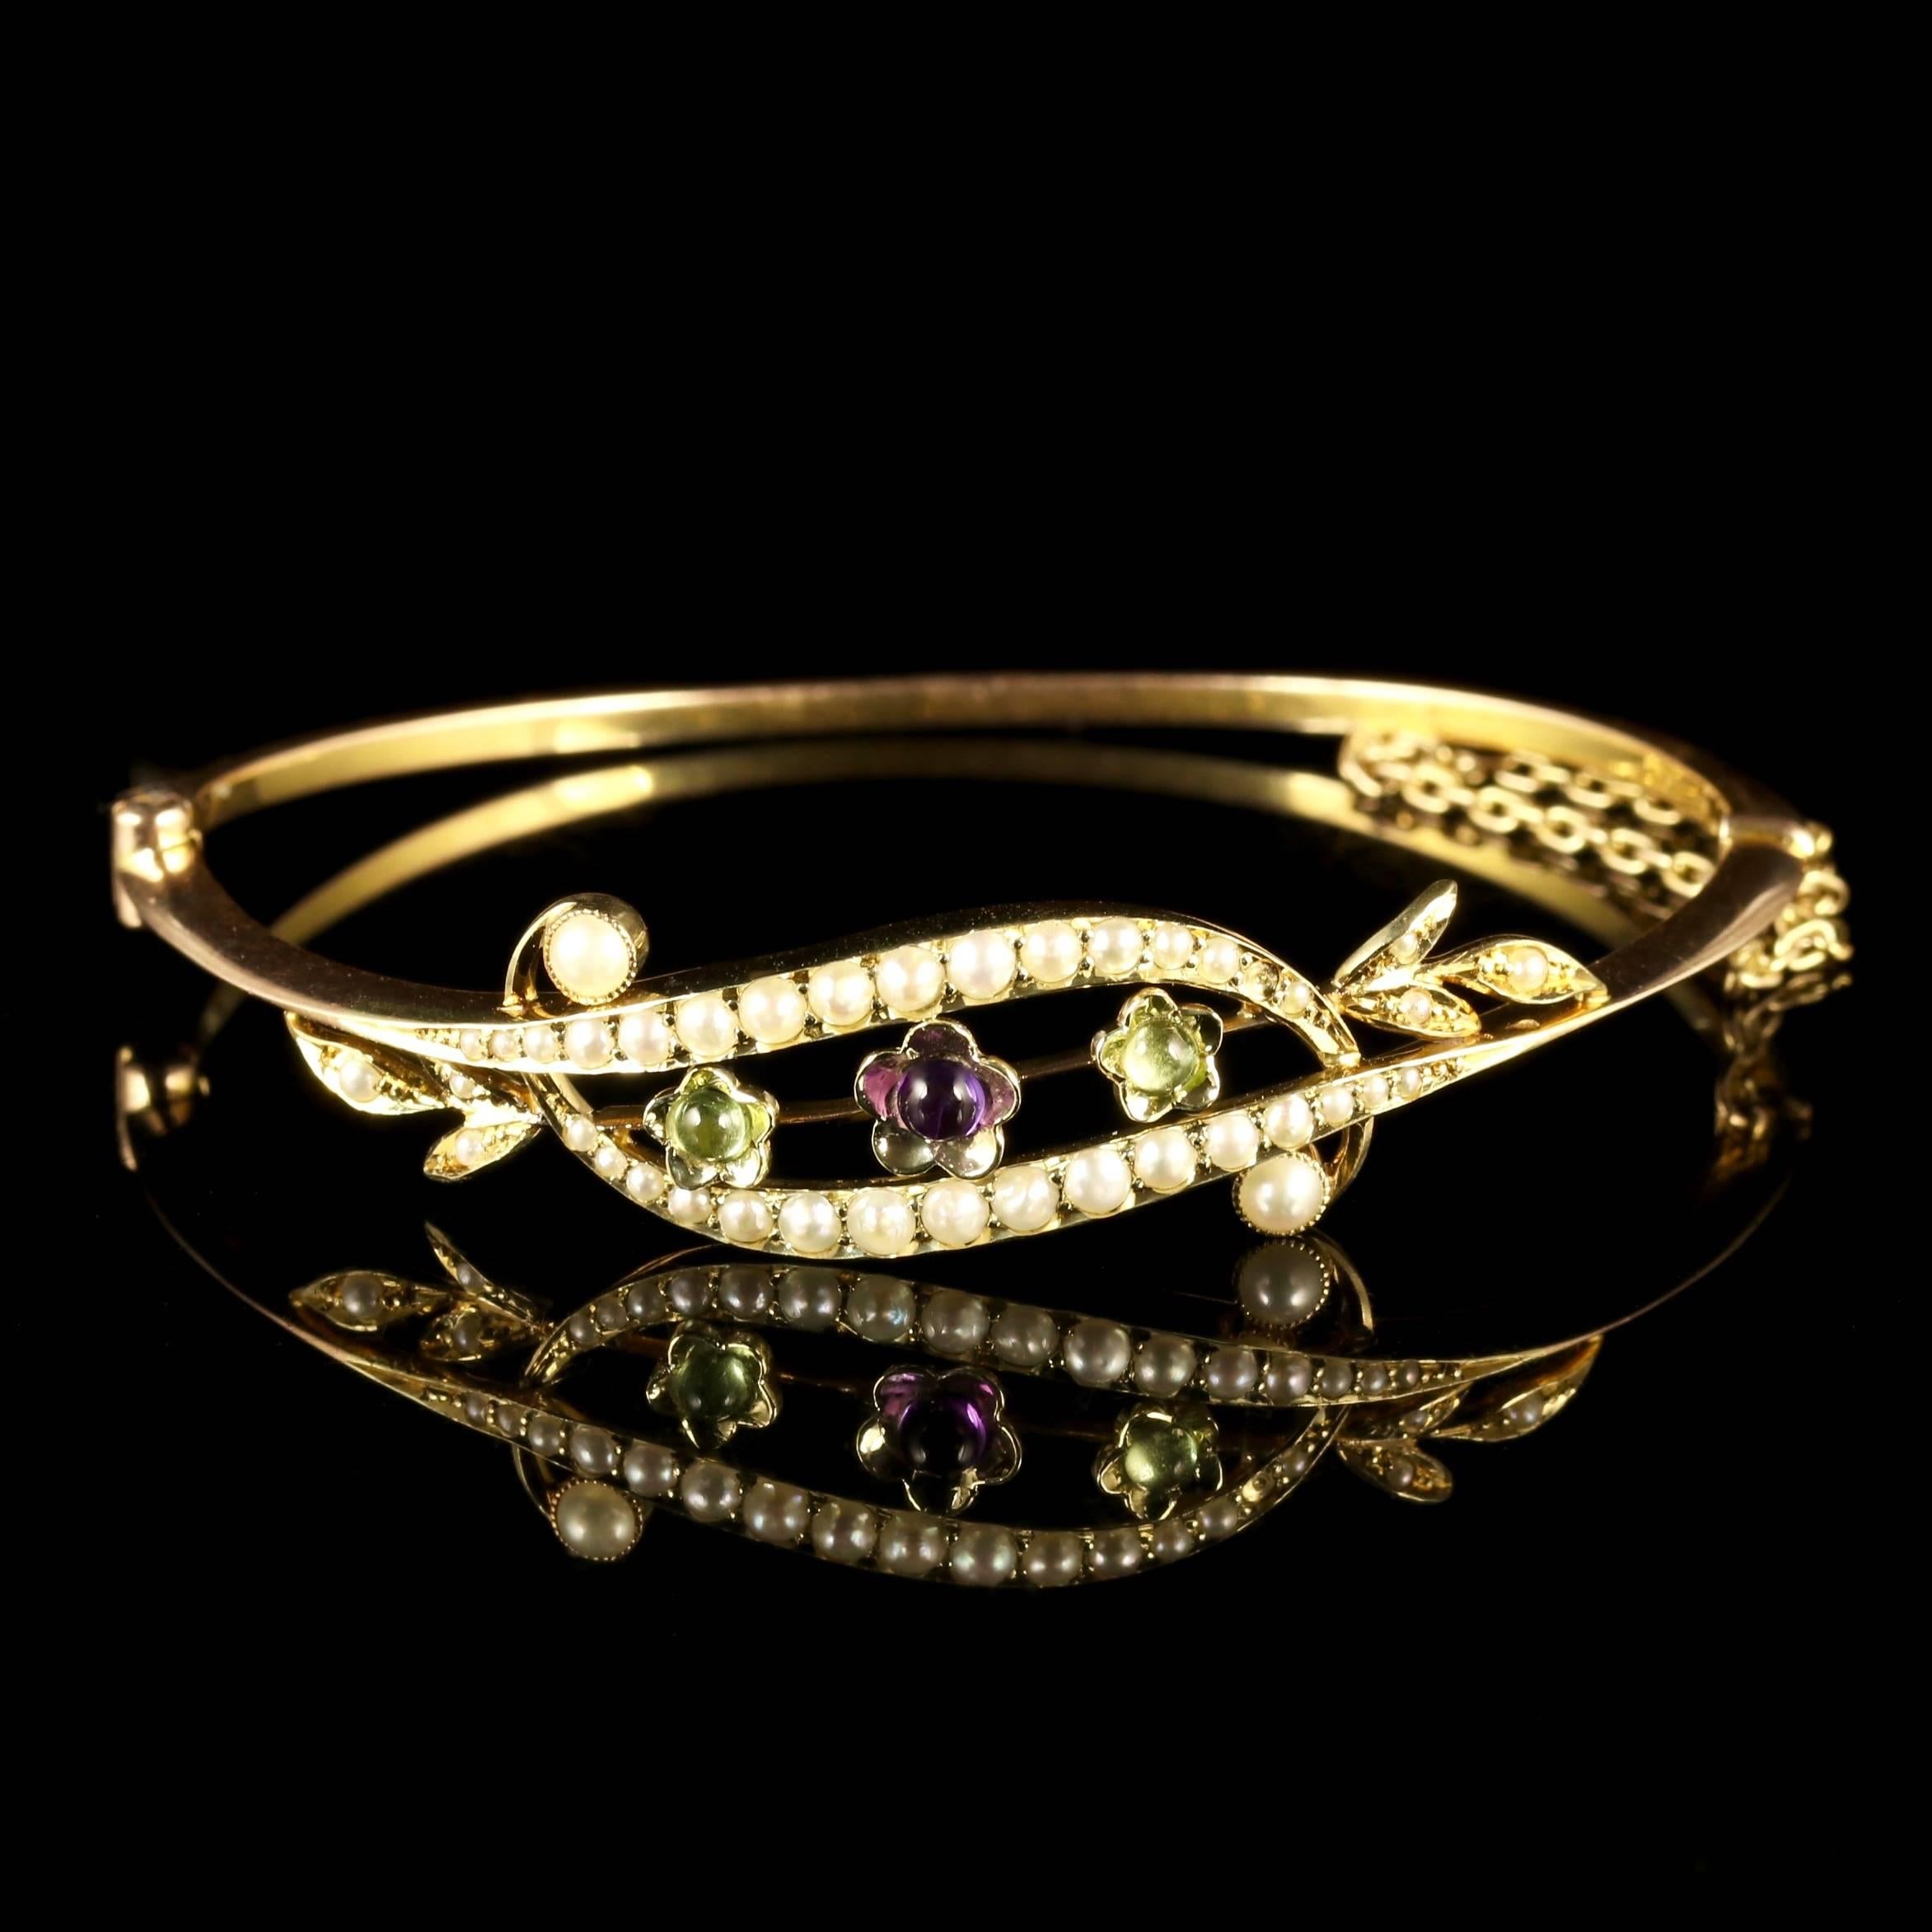 This fabulous Victorian 15ct Gold Suffragette bangle is Circa 1900.

This beautiful bangle with is adorned in Amethysts, Peridots and Pearls in a floral style gallery.

Suffragettes liked to be depicted as feminine, their jewellery popularly